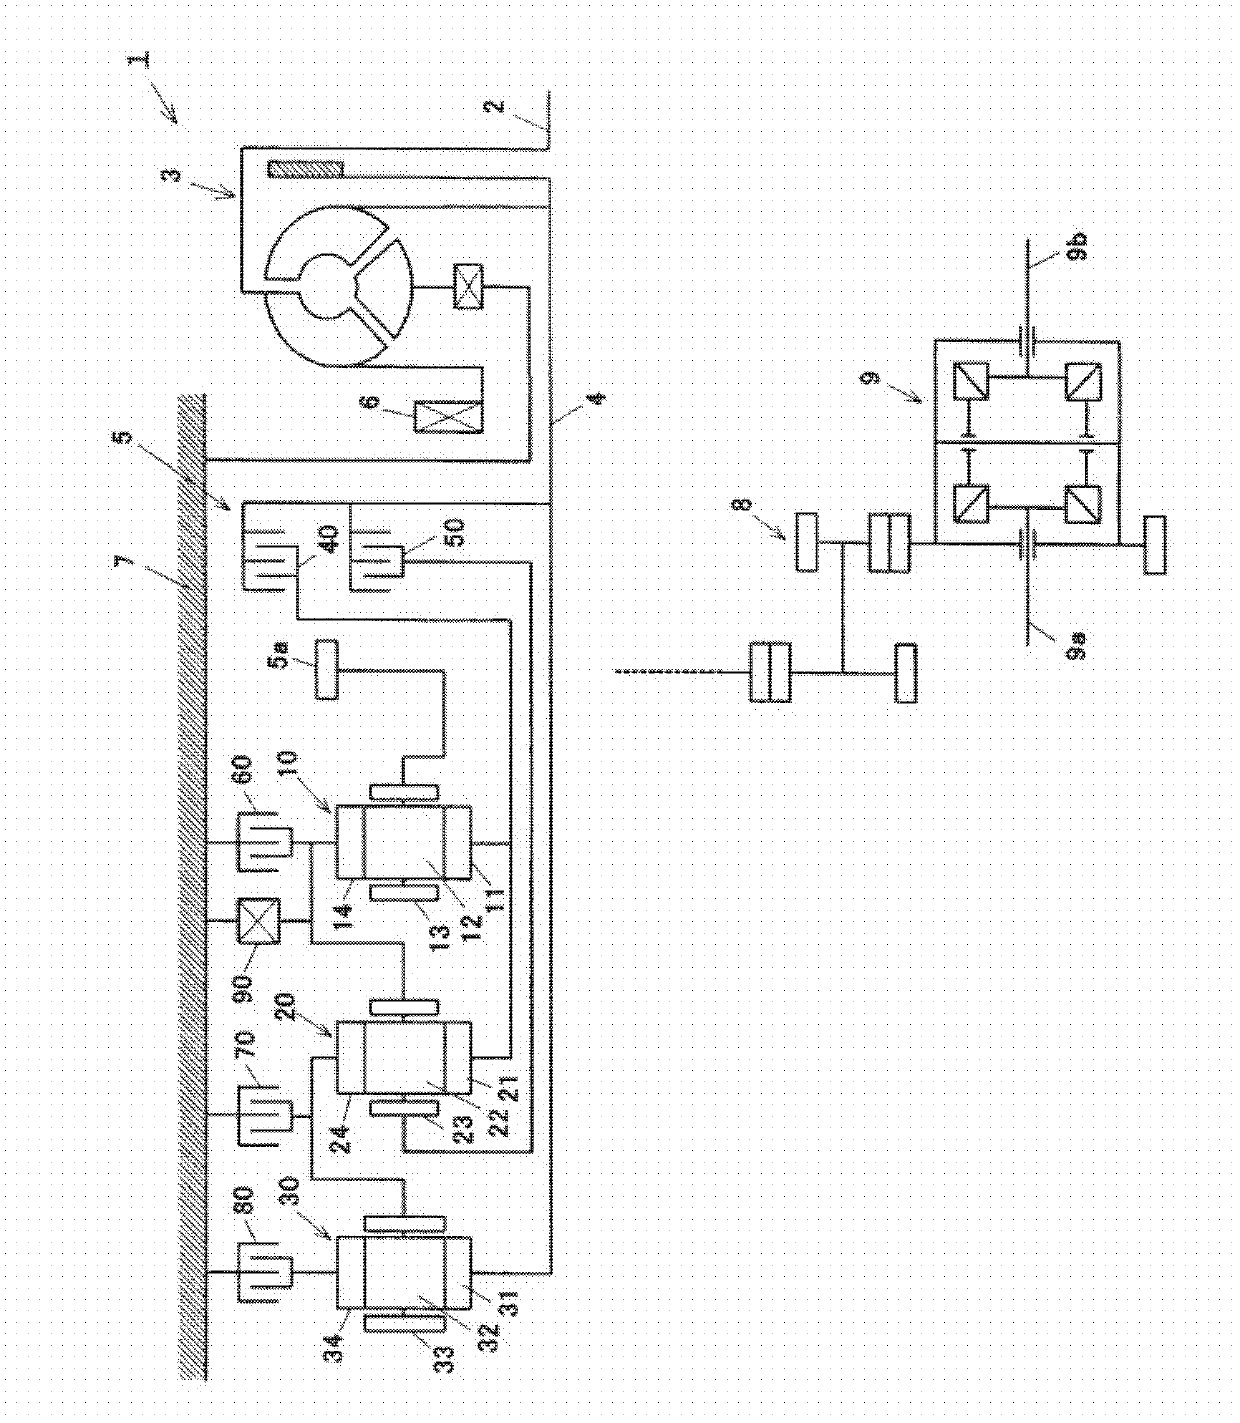 Hydraulic control device of automatic transmission